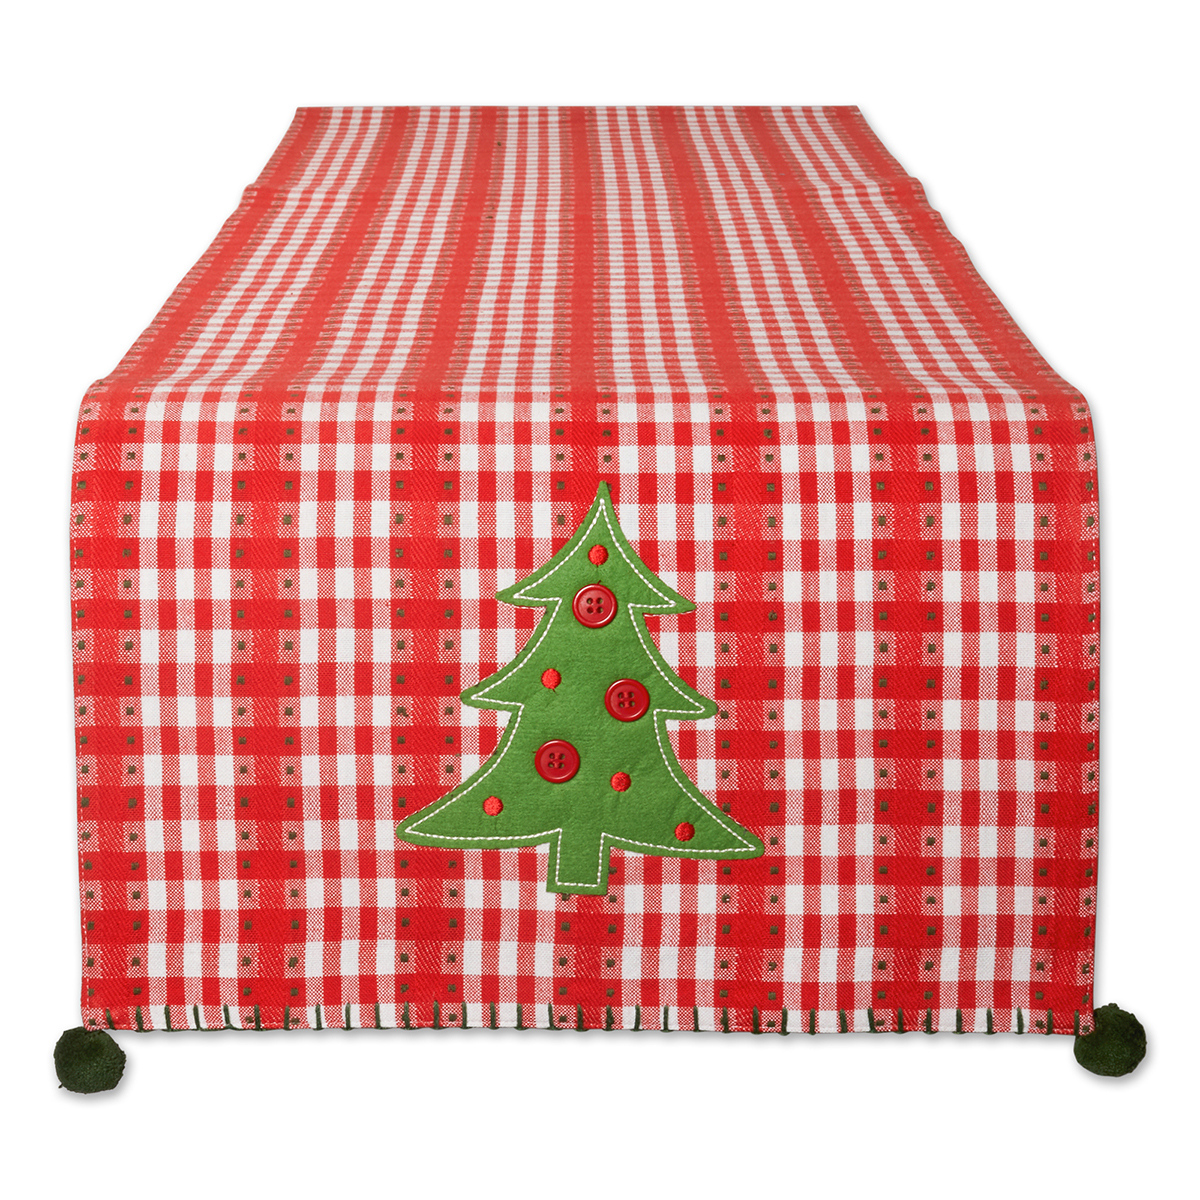 DII(R) Jolly Tree Reversible Embellished Table Runner